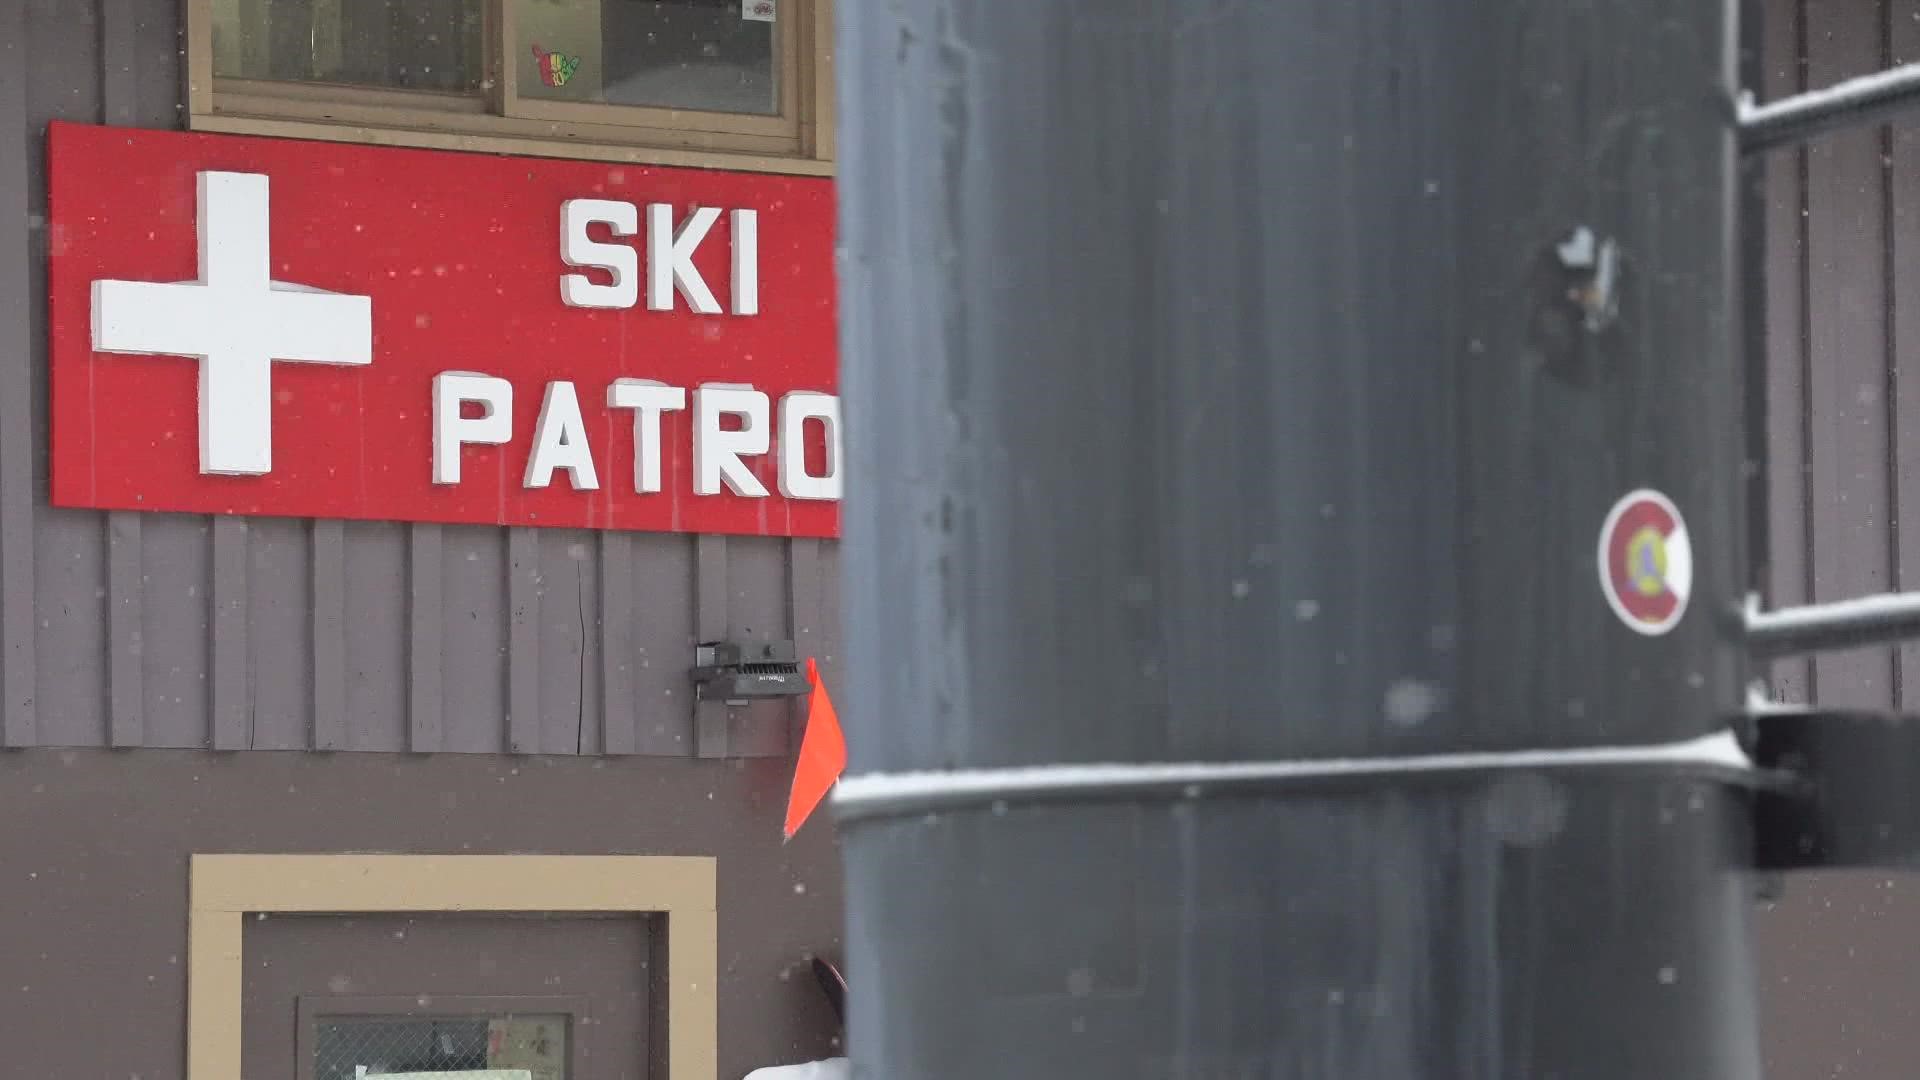 Ski Patrol at Loveland Ski Area will encourage staff and guests to get inside and warm up often to avoid problems from the extremely cold weather.